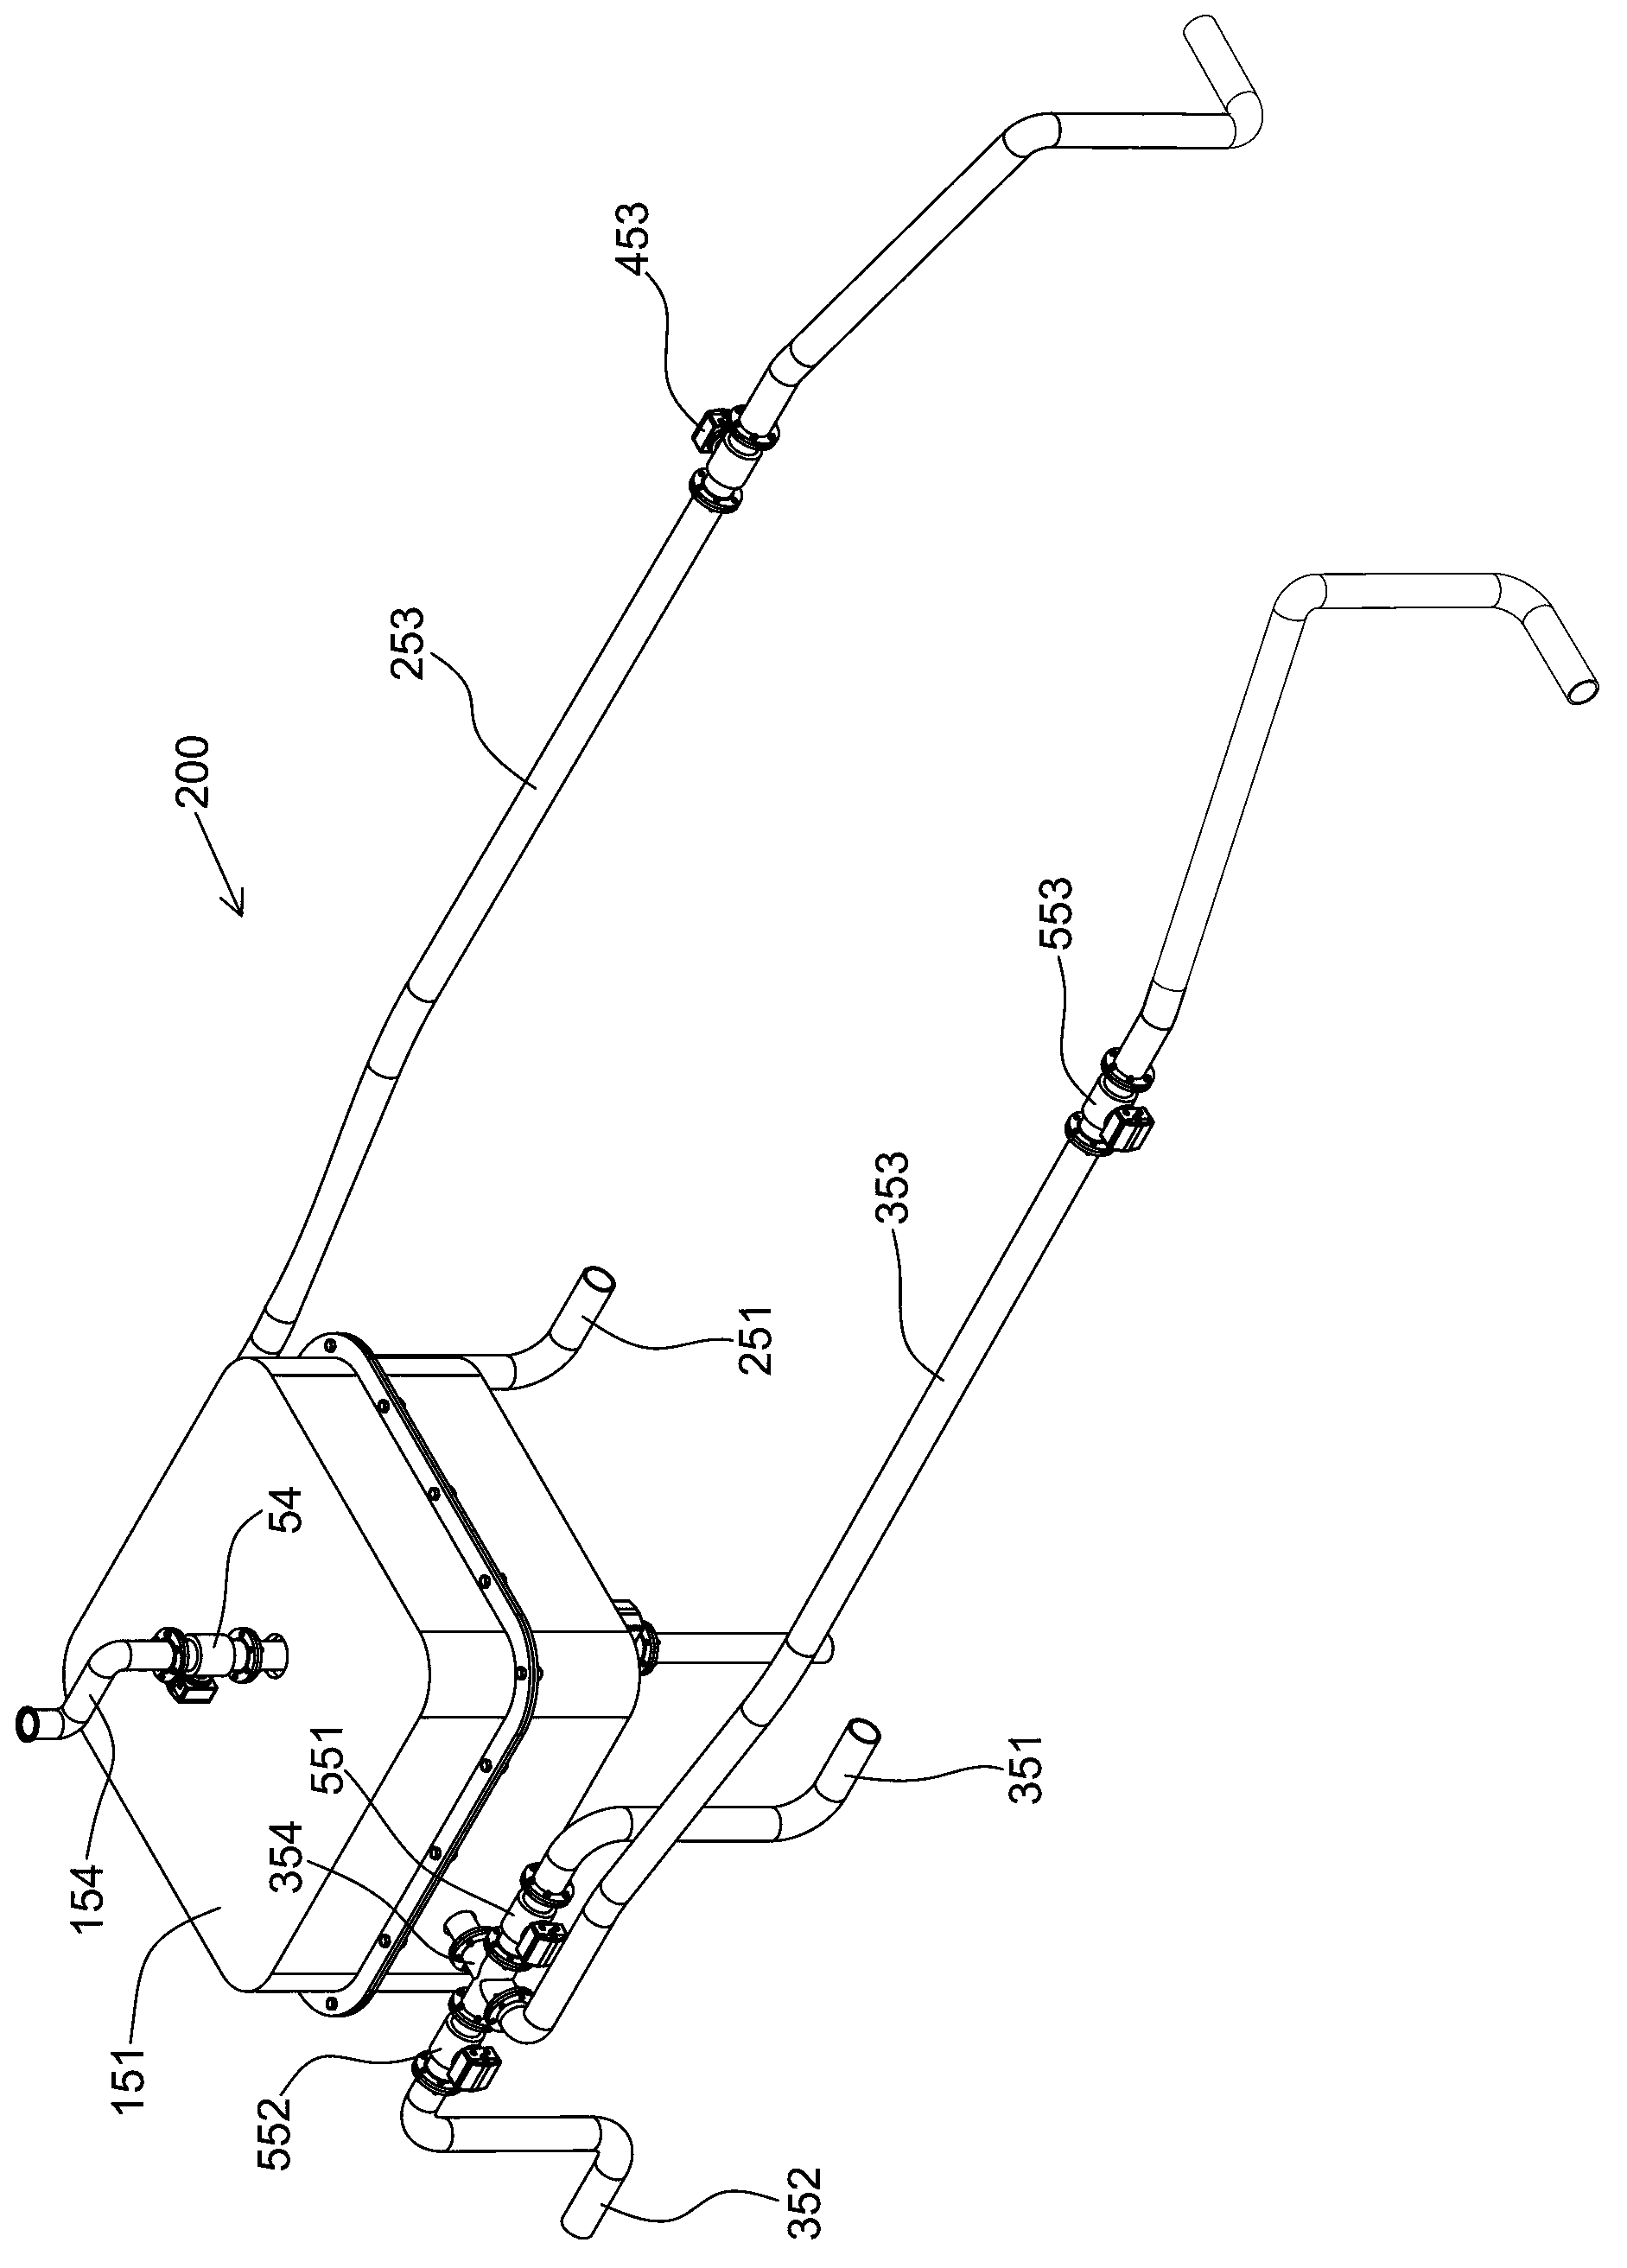 Water spray propulsion unit for ship